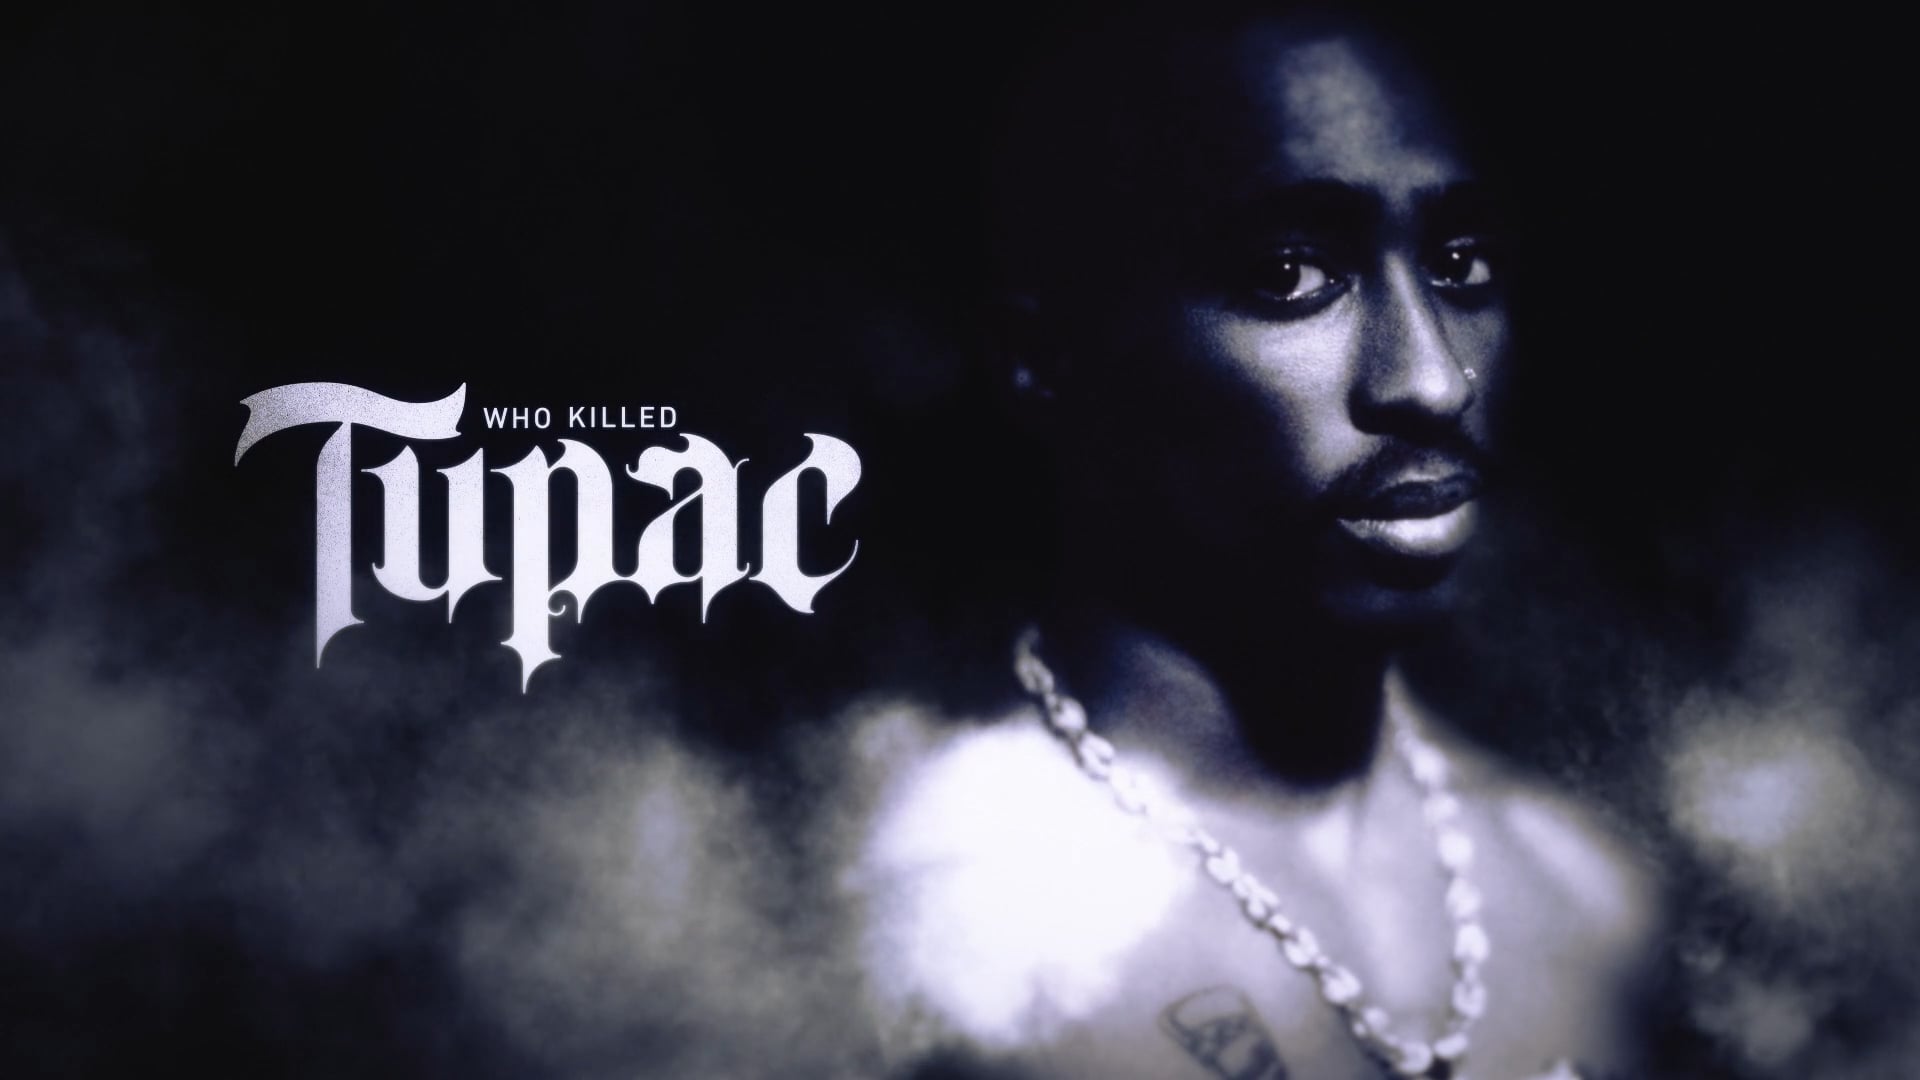 A&E: "Who Killed Tupac?" Intro Titles Director's Cut